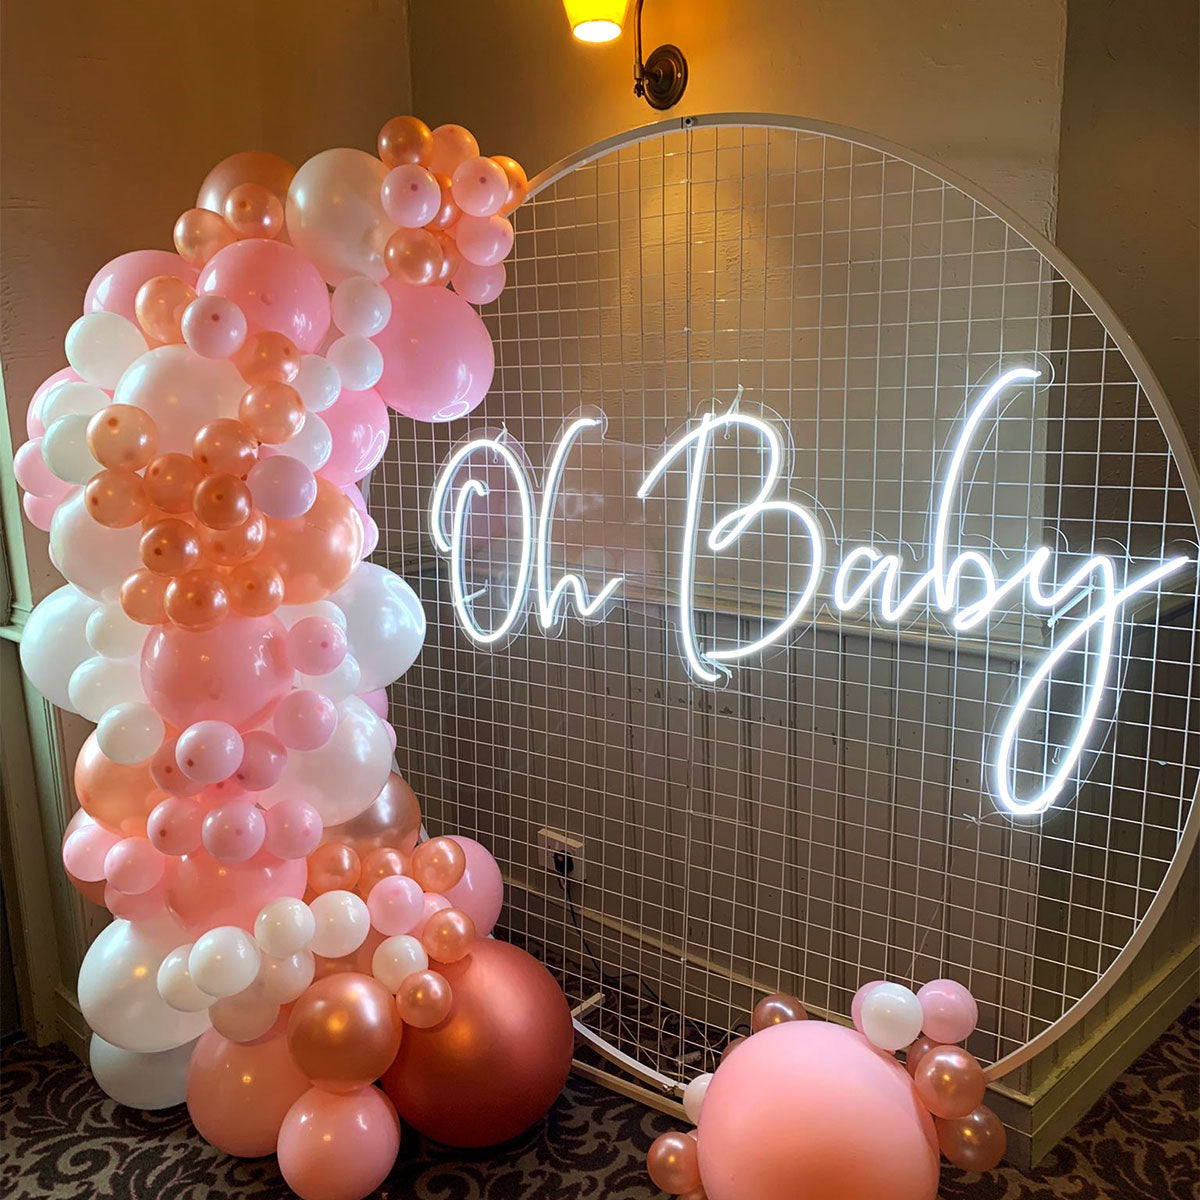 Oh Baby neon sign